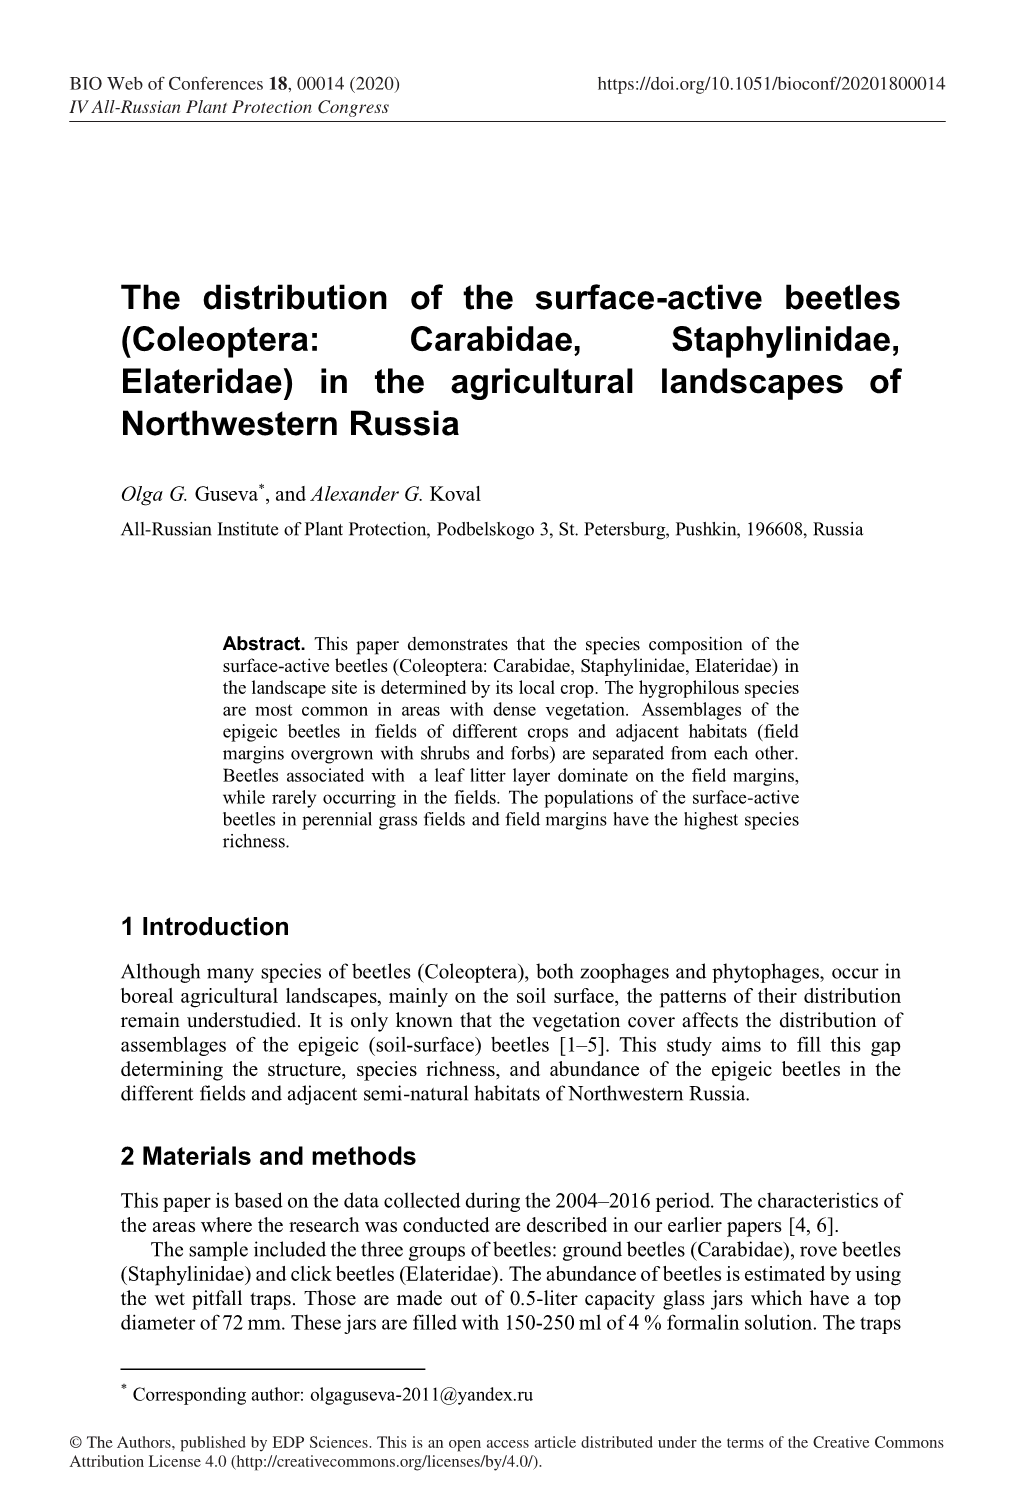 The Distribution of the Surface-Active Beetles (Coleoptera: Carabidae, Staphylinidae, Elateridae) in the Agricultural Landscapes of Northwestern Russia